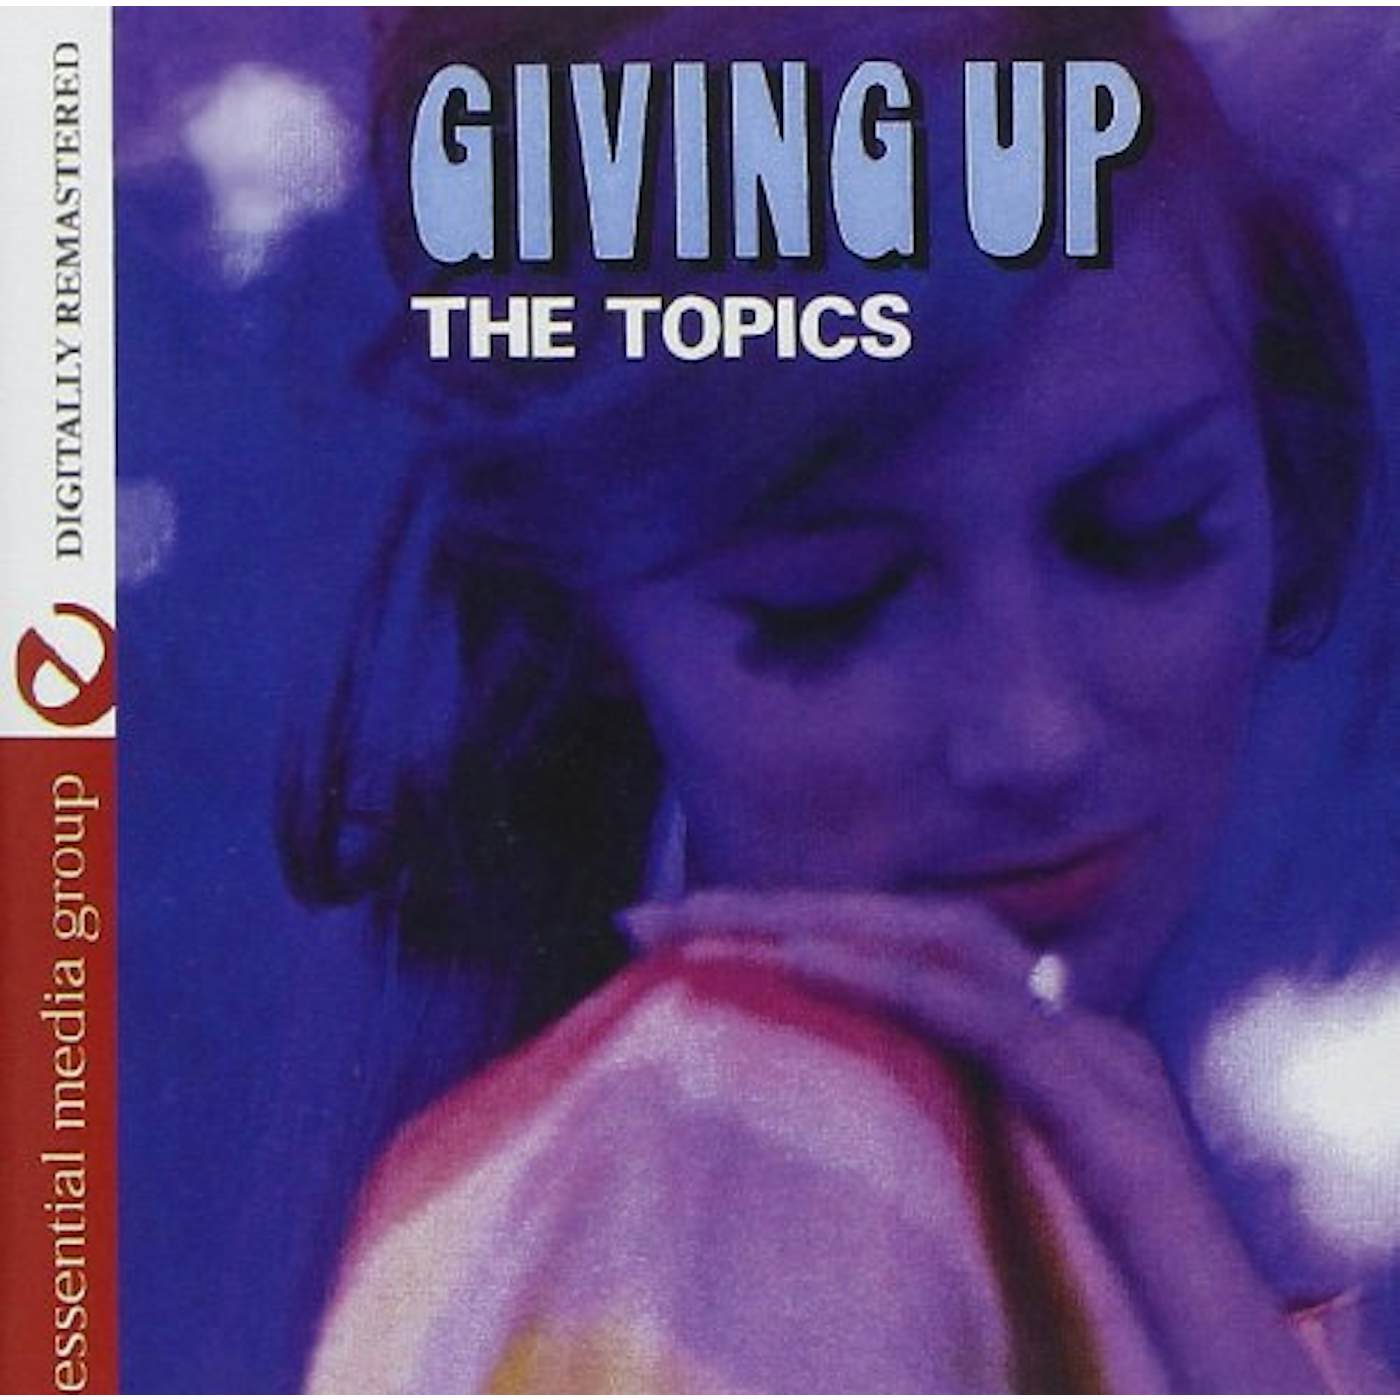 Topics GIVING UP CD